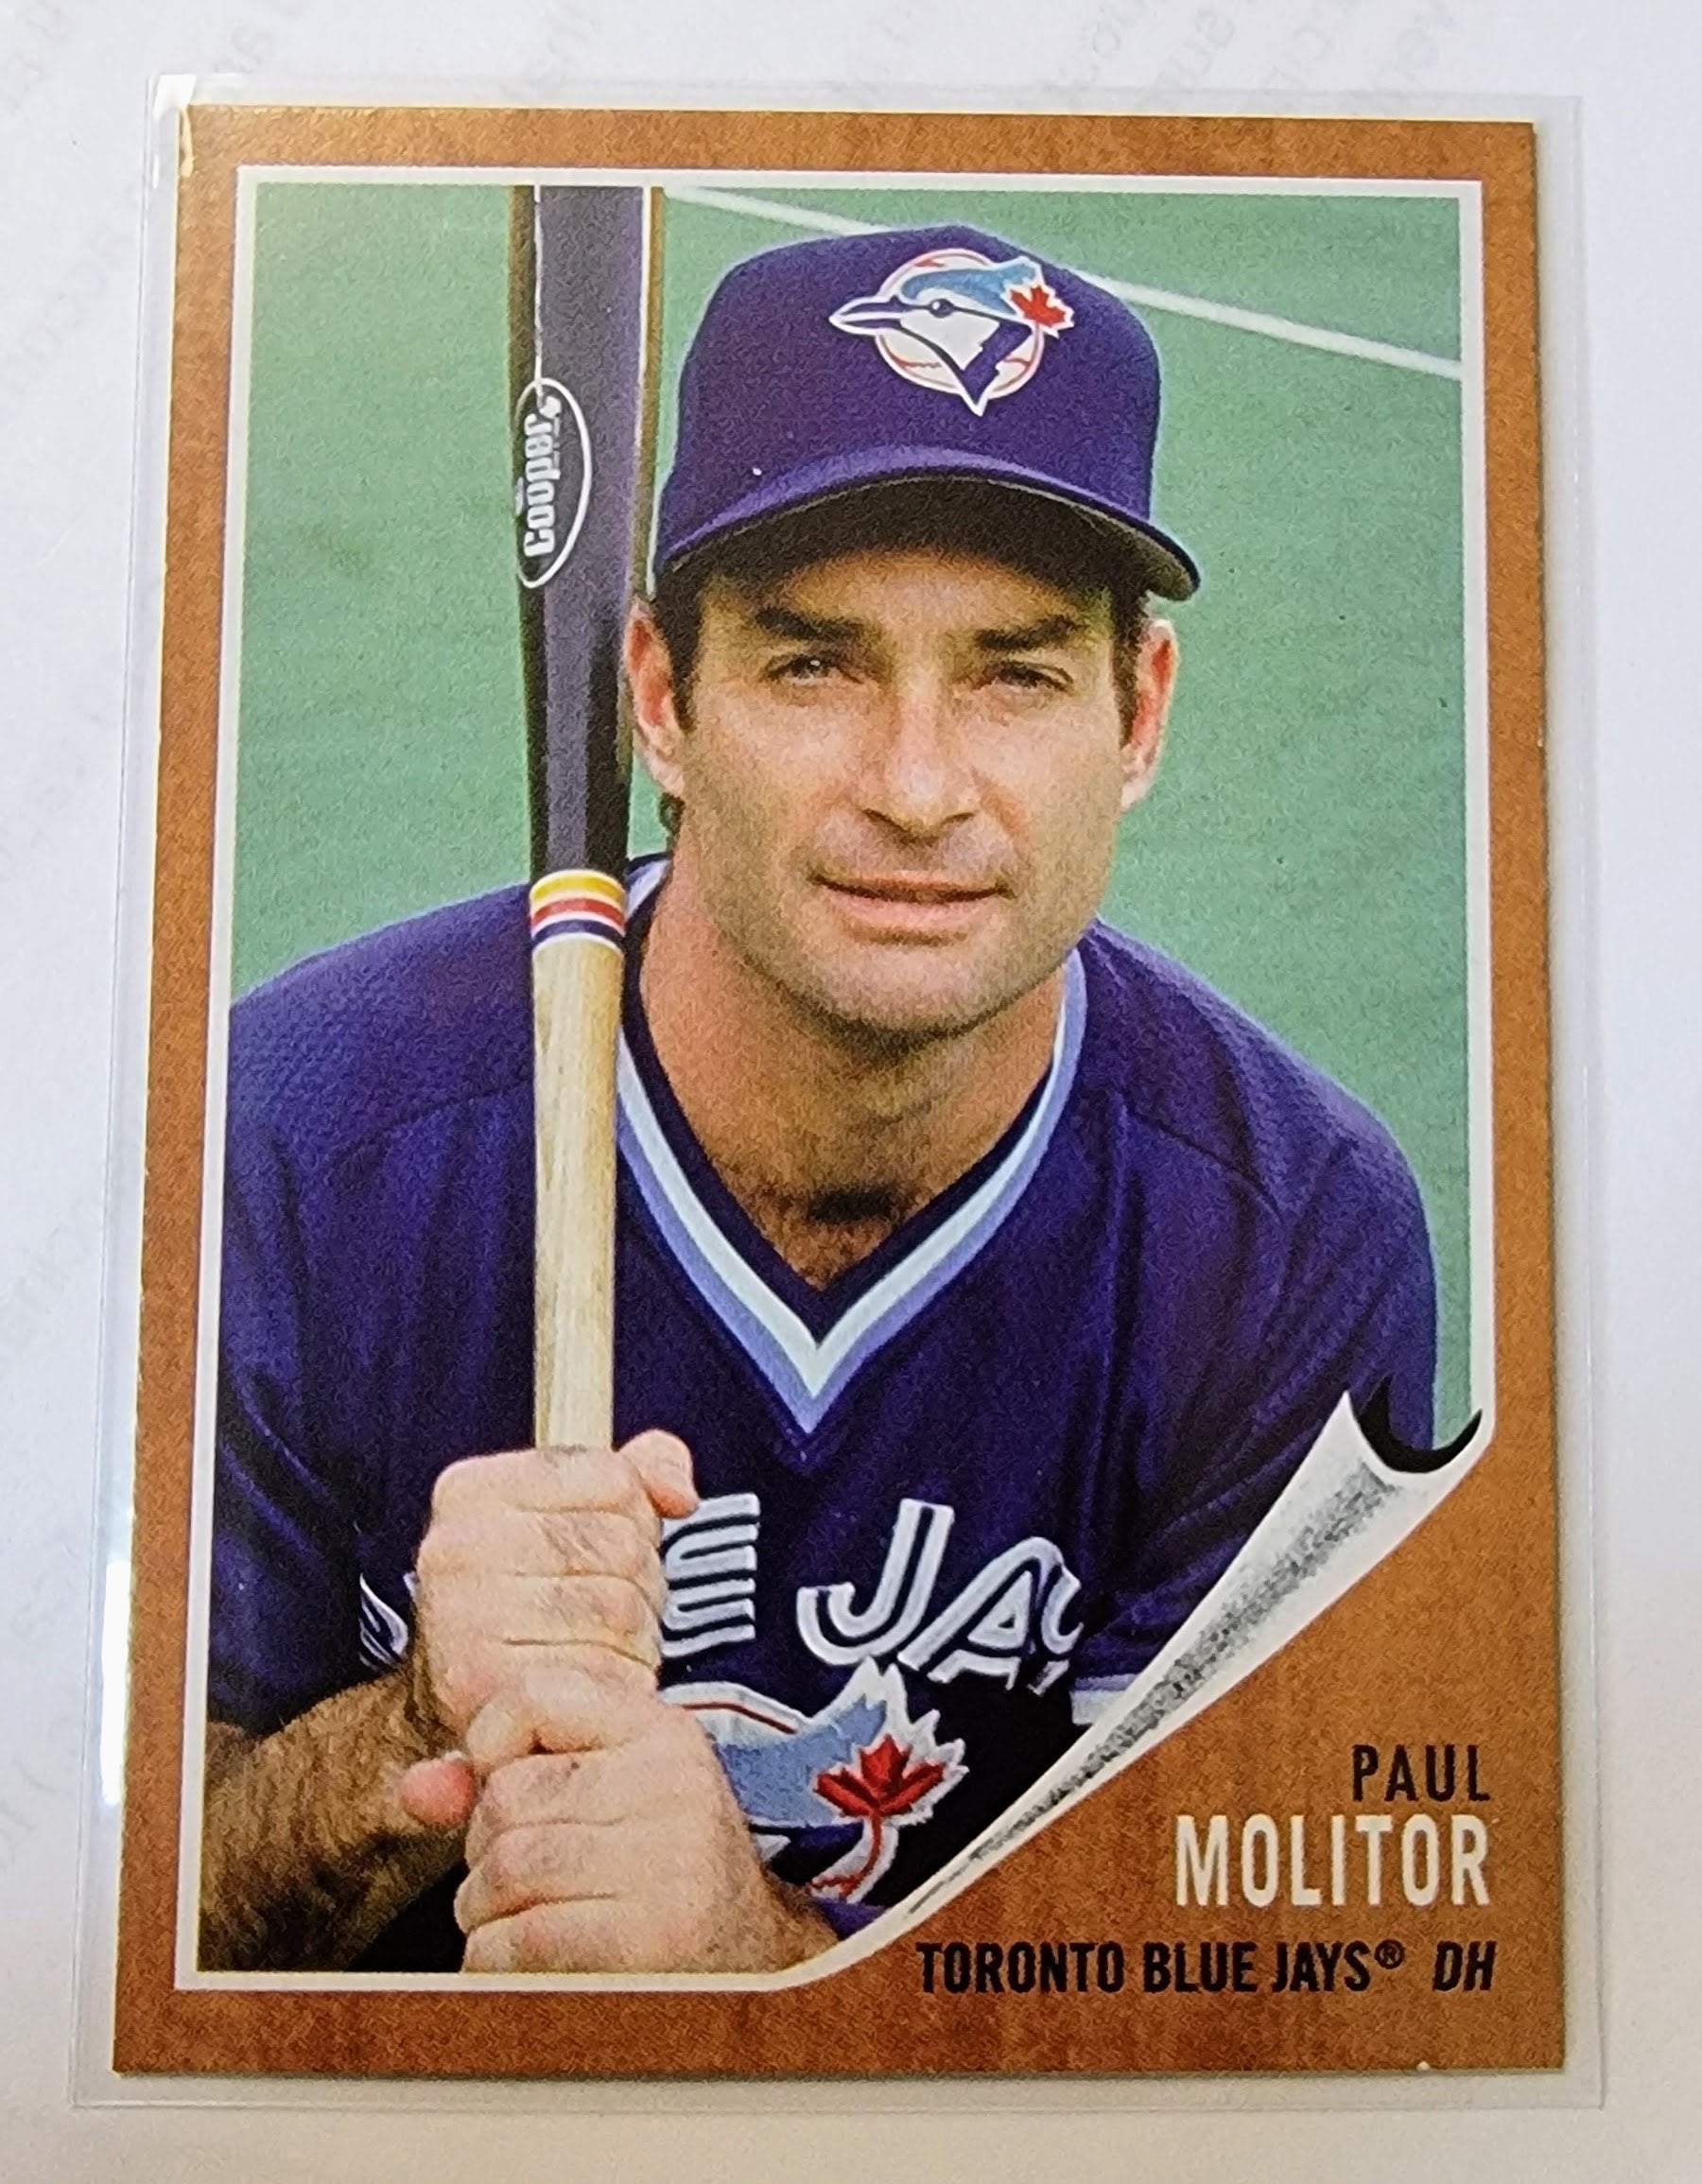 2021 Topps Archives Paul Molitor 1962 Baseball Trading Card SMCB1 simple Xclusive Collectibles   